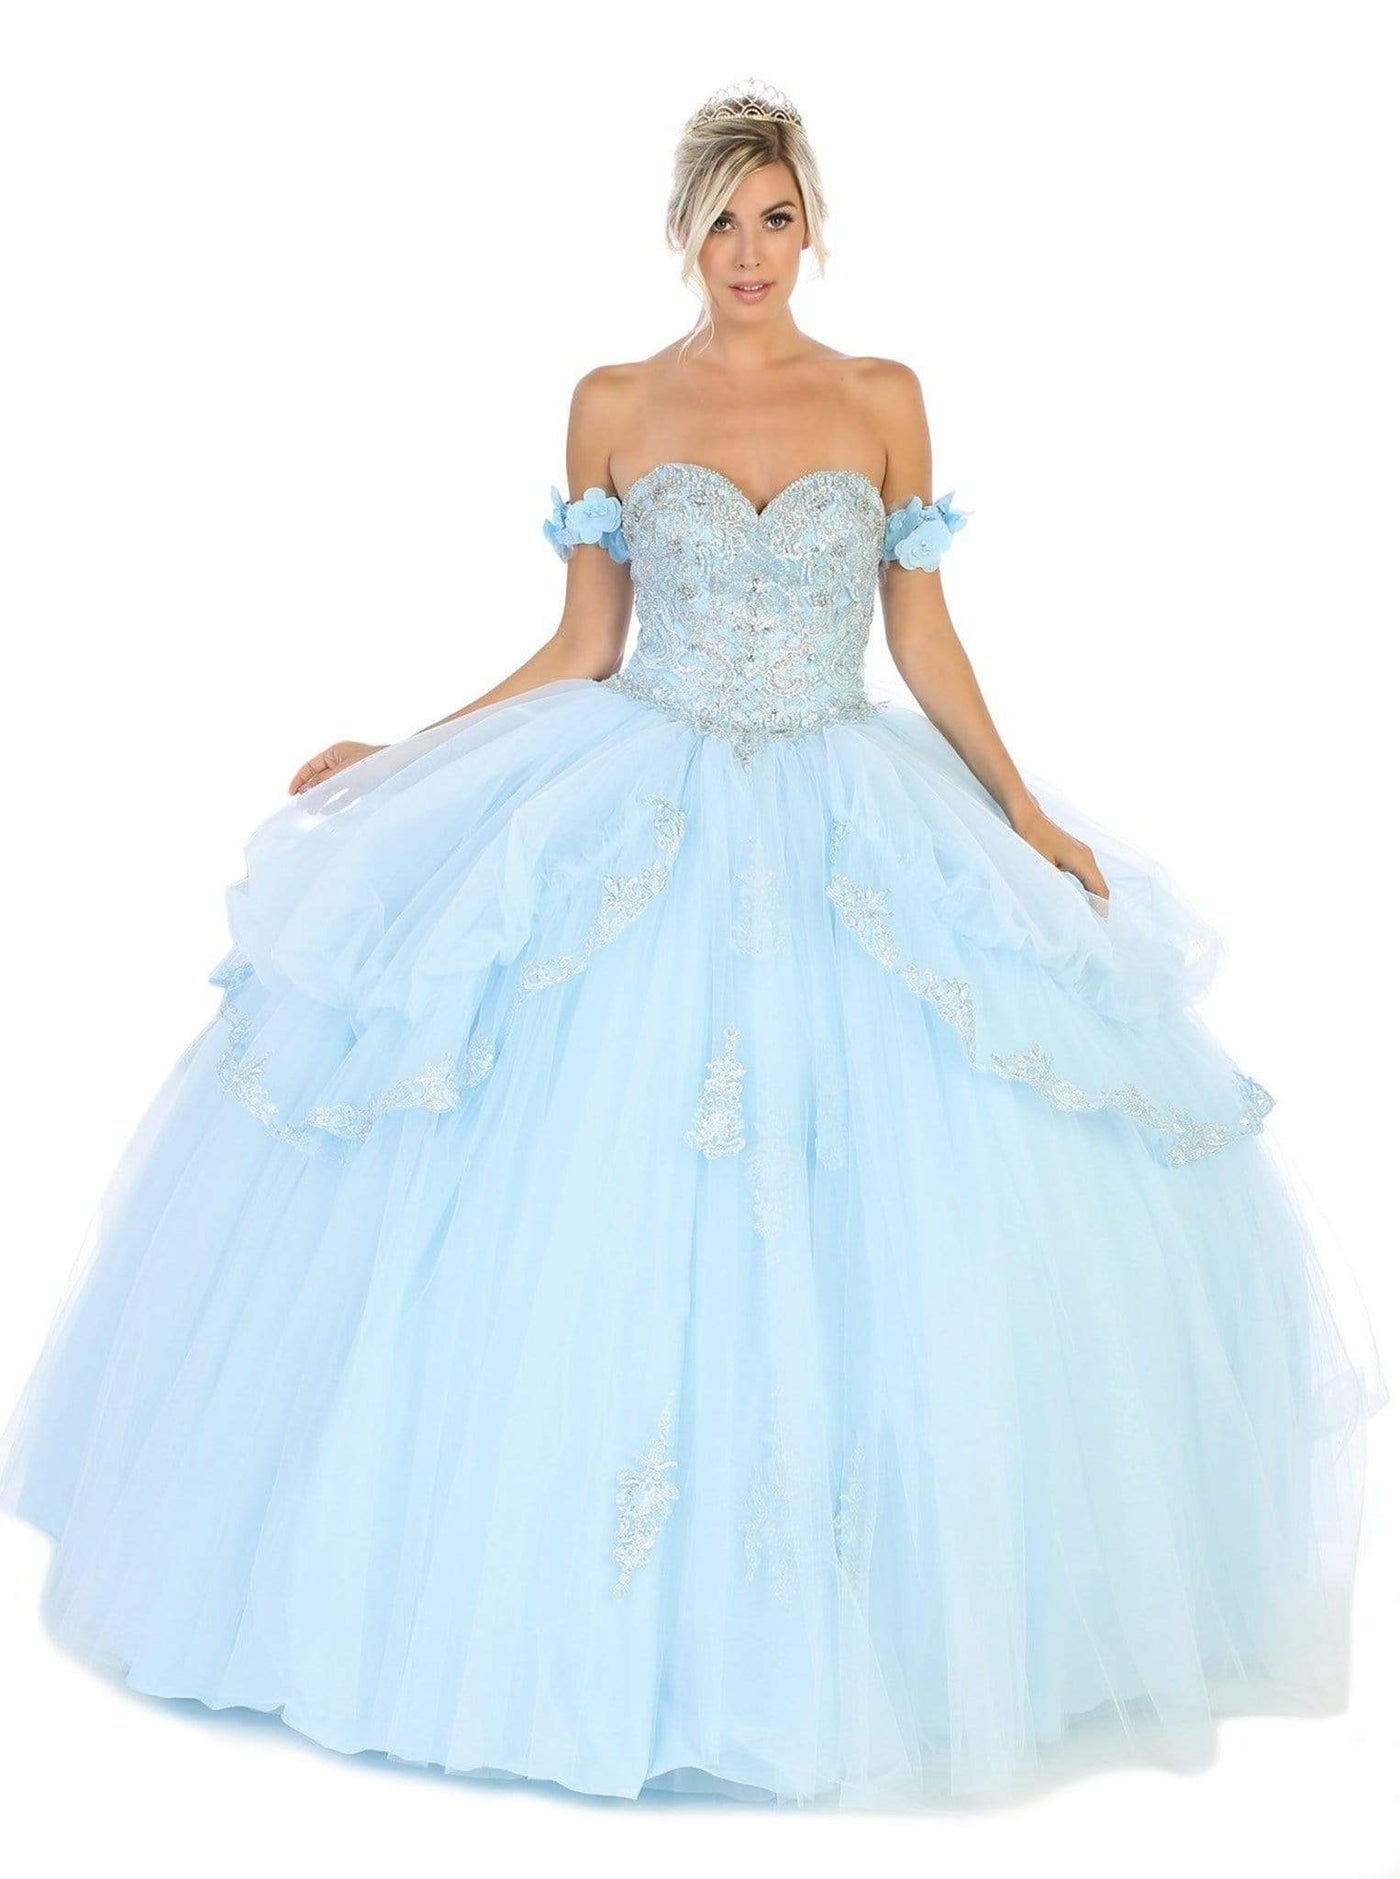 May Queen - LK120 Jeweled Sweetheart Bodice Ballgown Special Occasion Dress 2 / Baby Blue